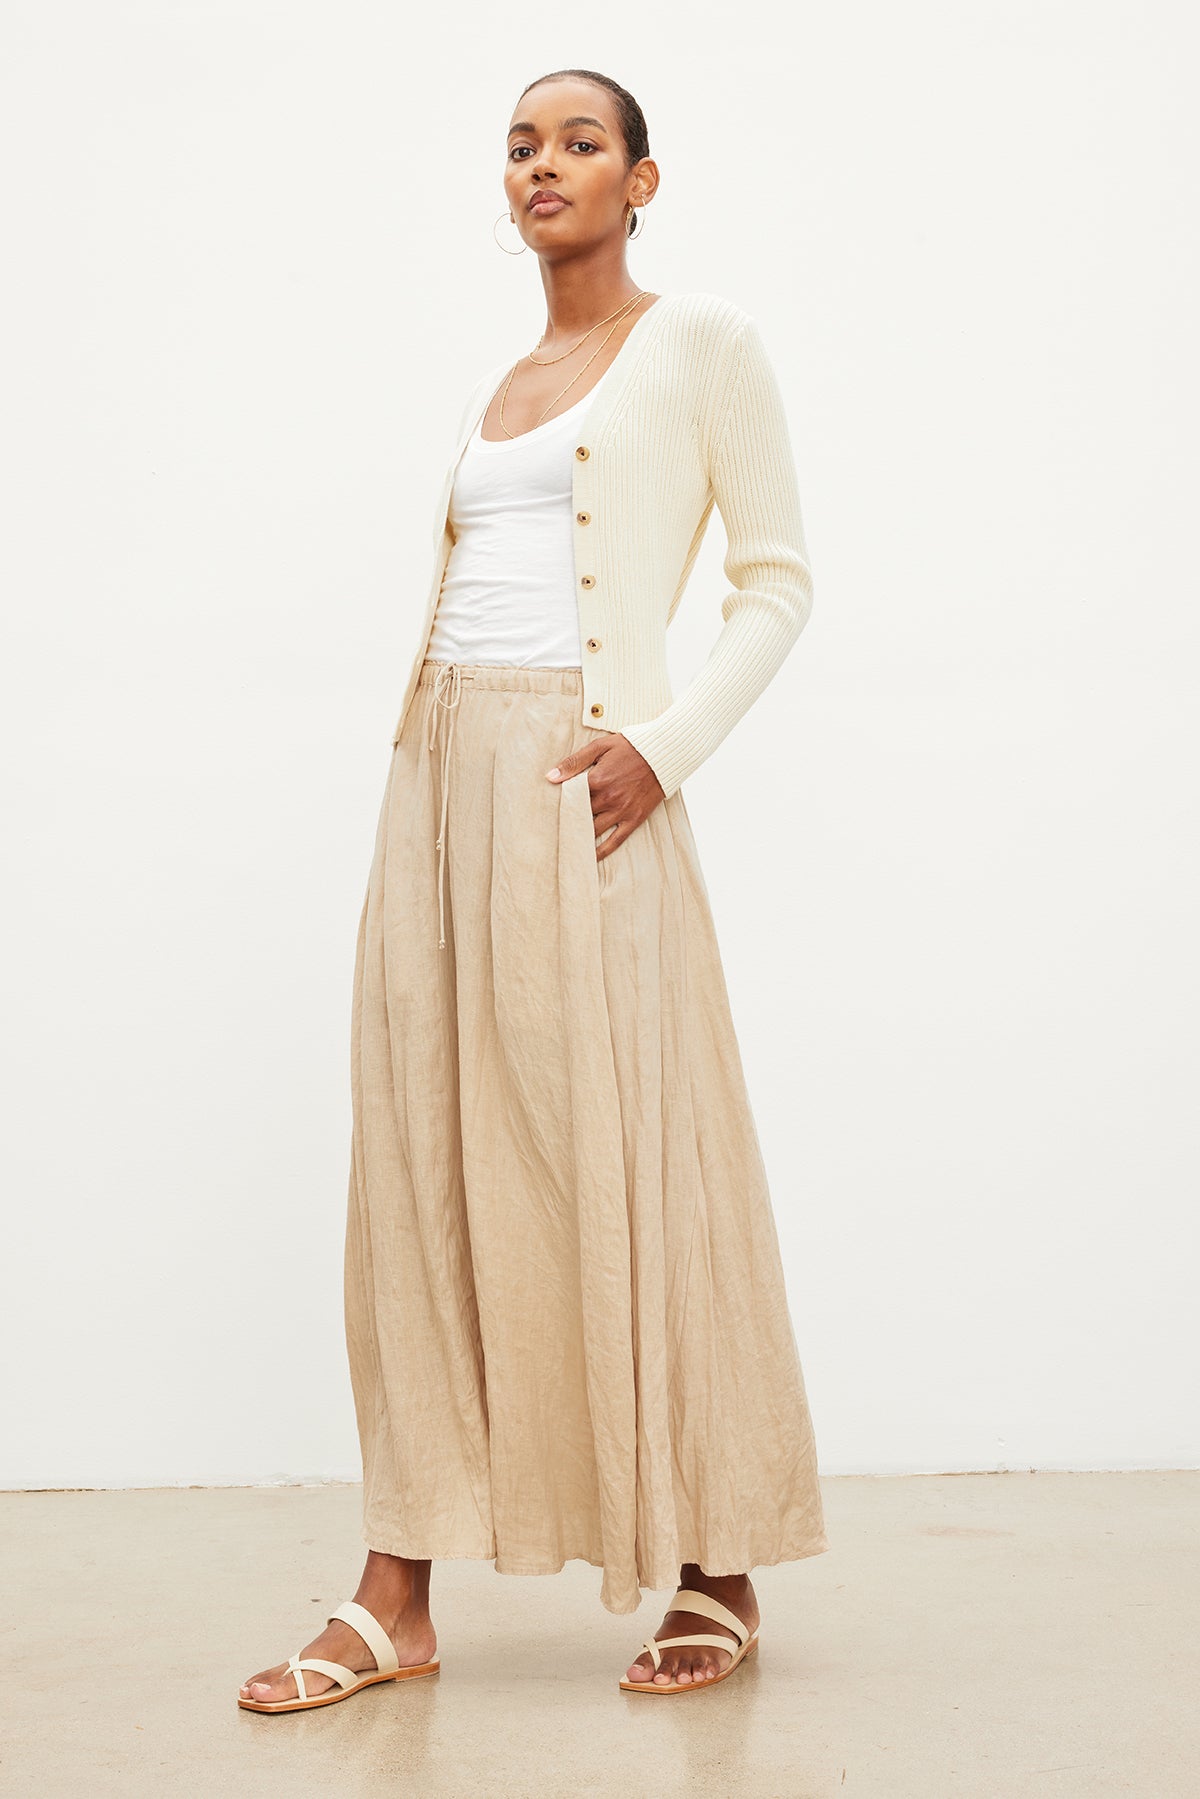 The model is wearing a Velvet by Graham & Spencer BAILEY LINEN MAXI SKIRT with an elastic drawstring waist.-35955424100545